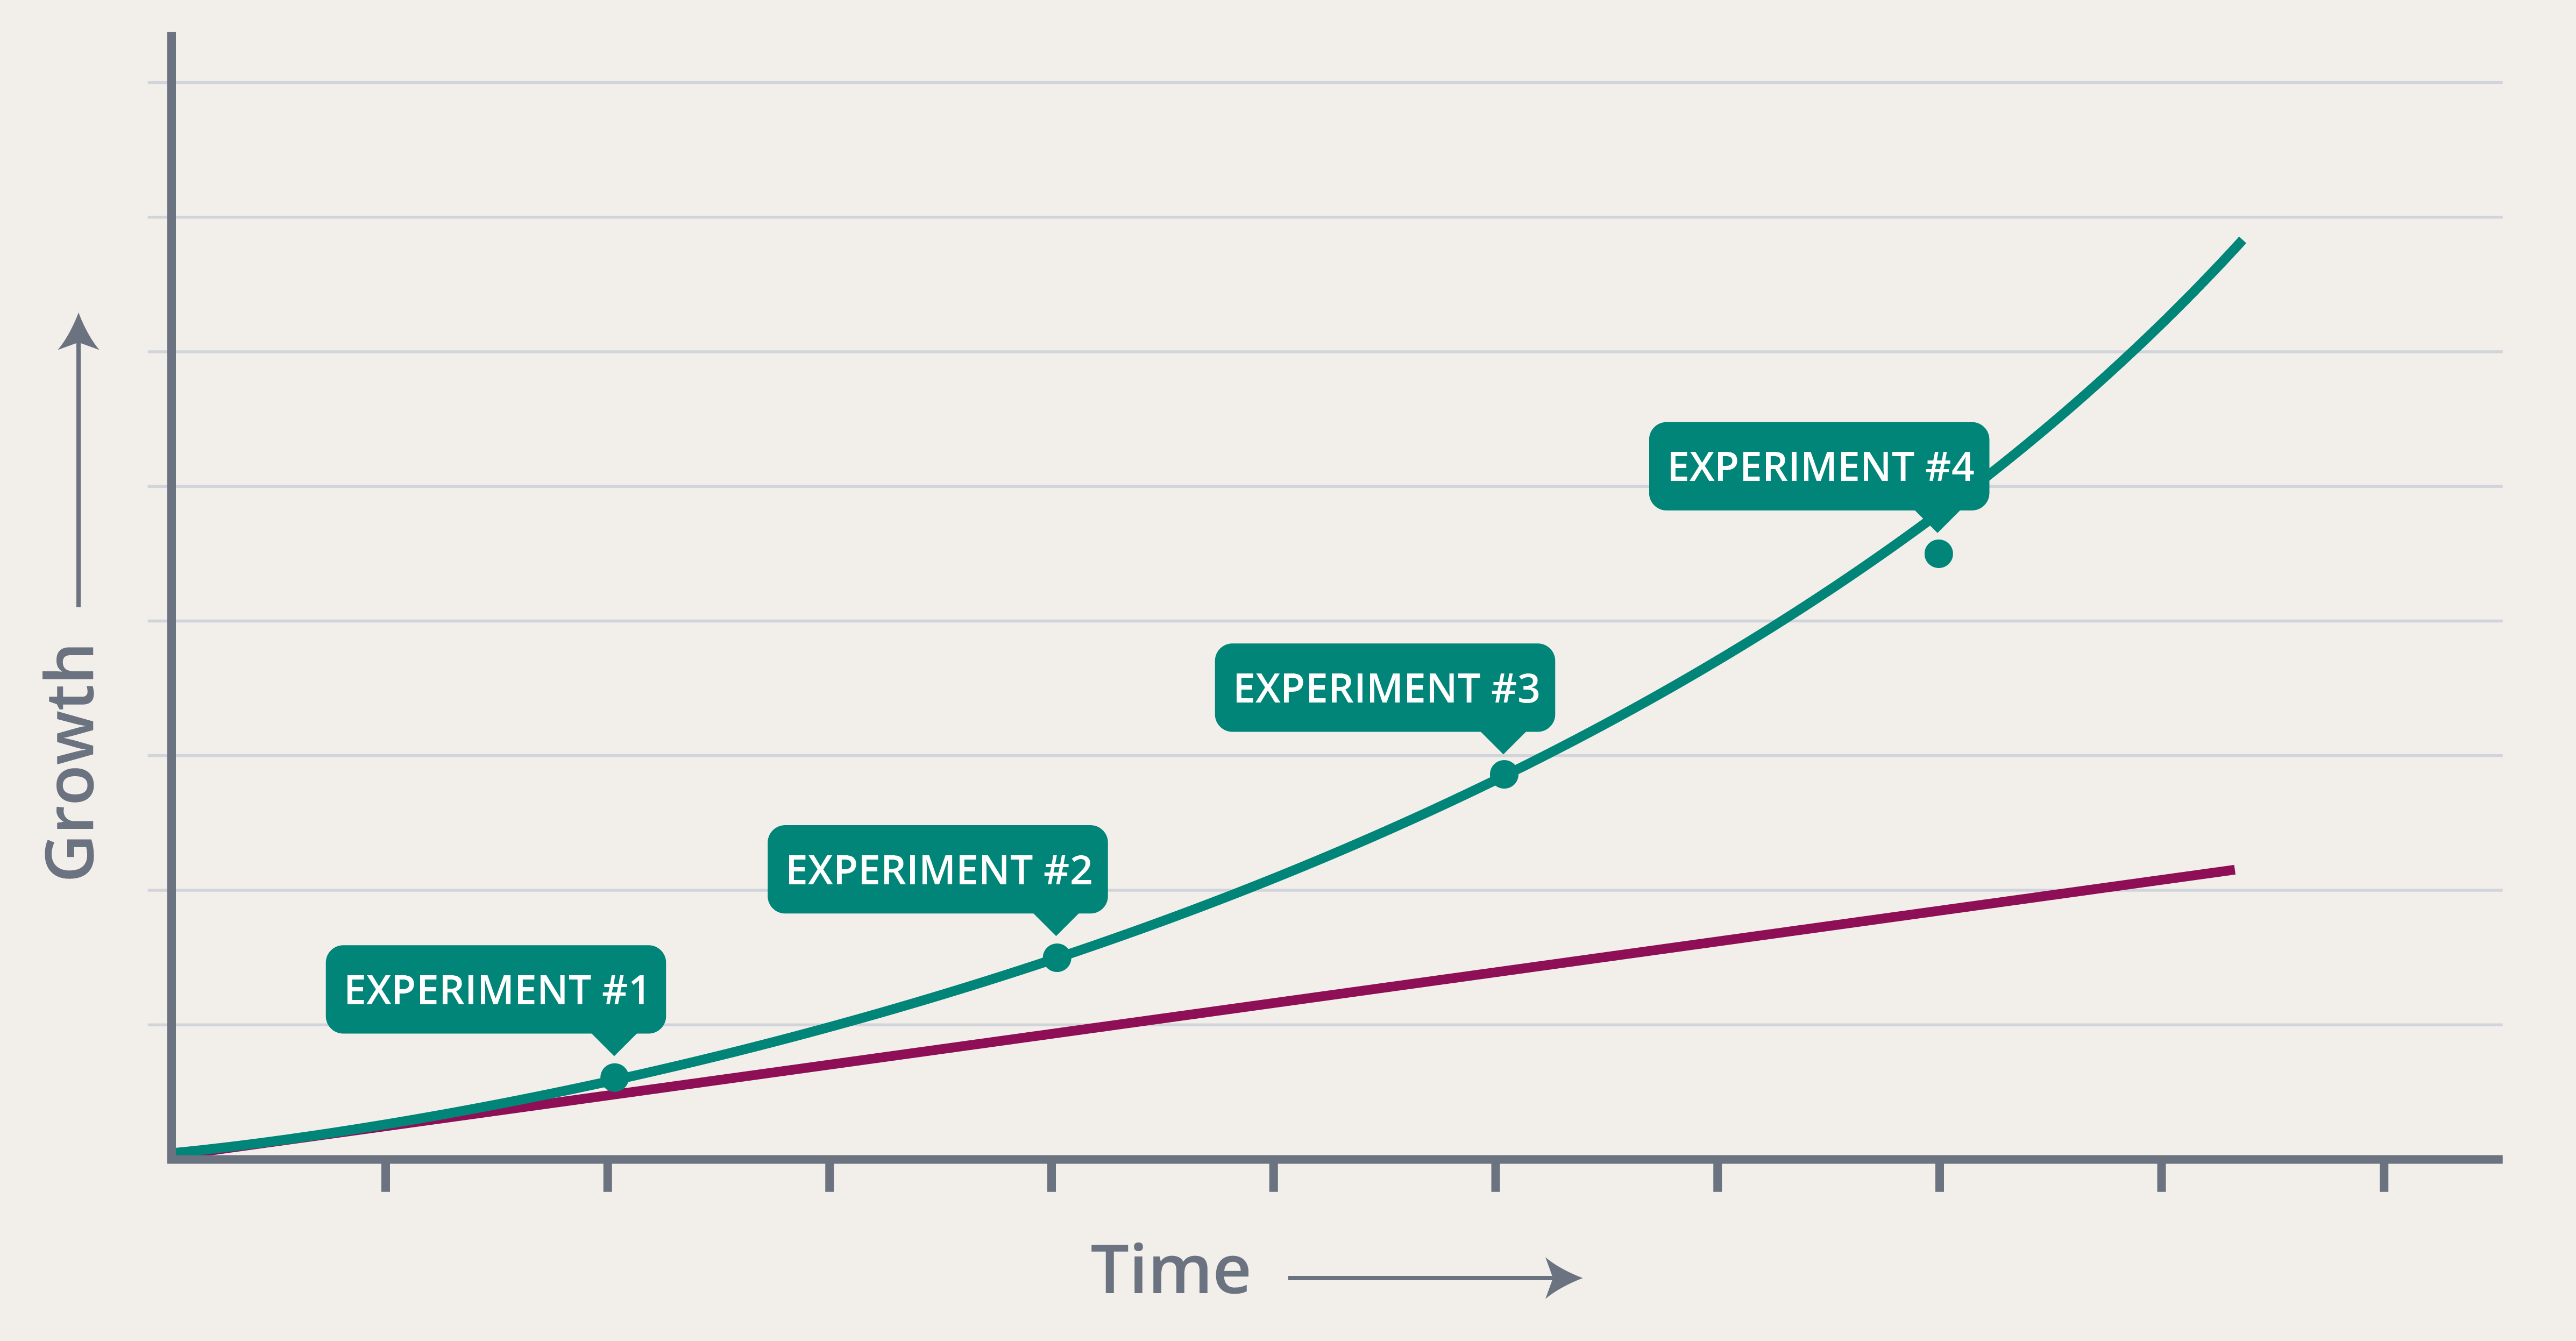 Graph with two lines where one line grows stronger over time due to experiments the business is running.